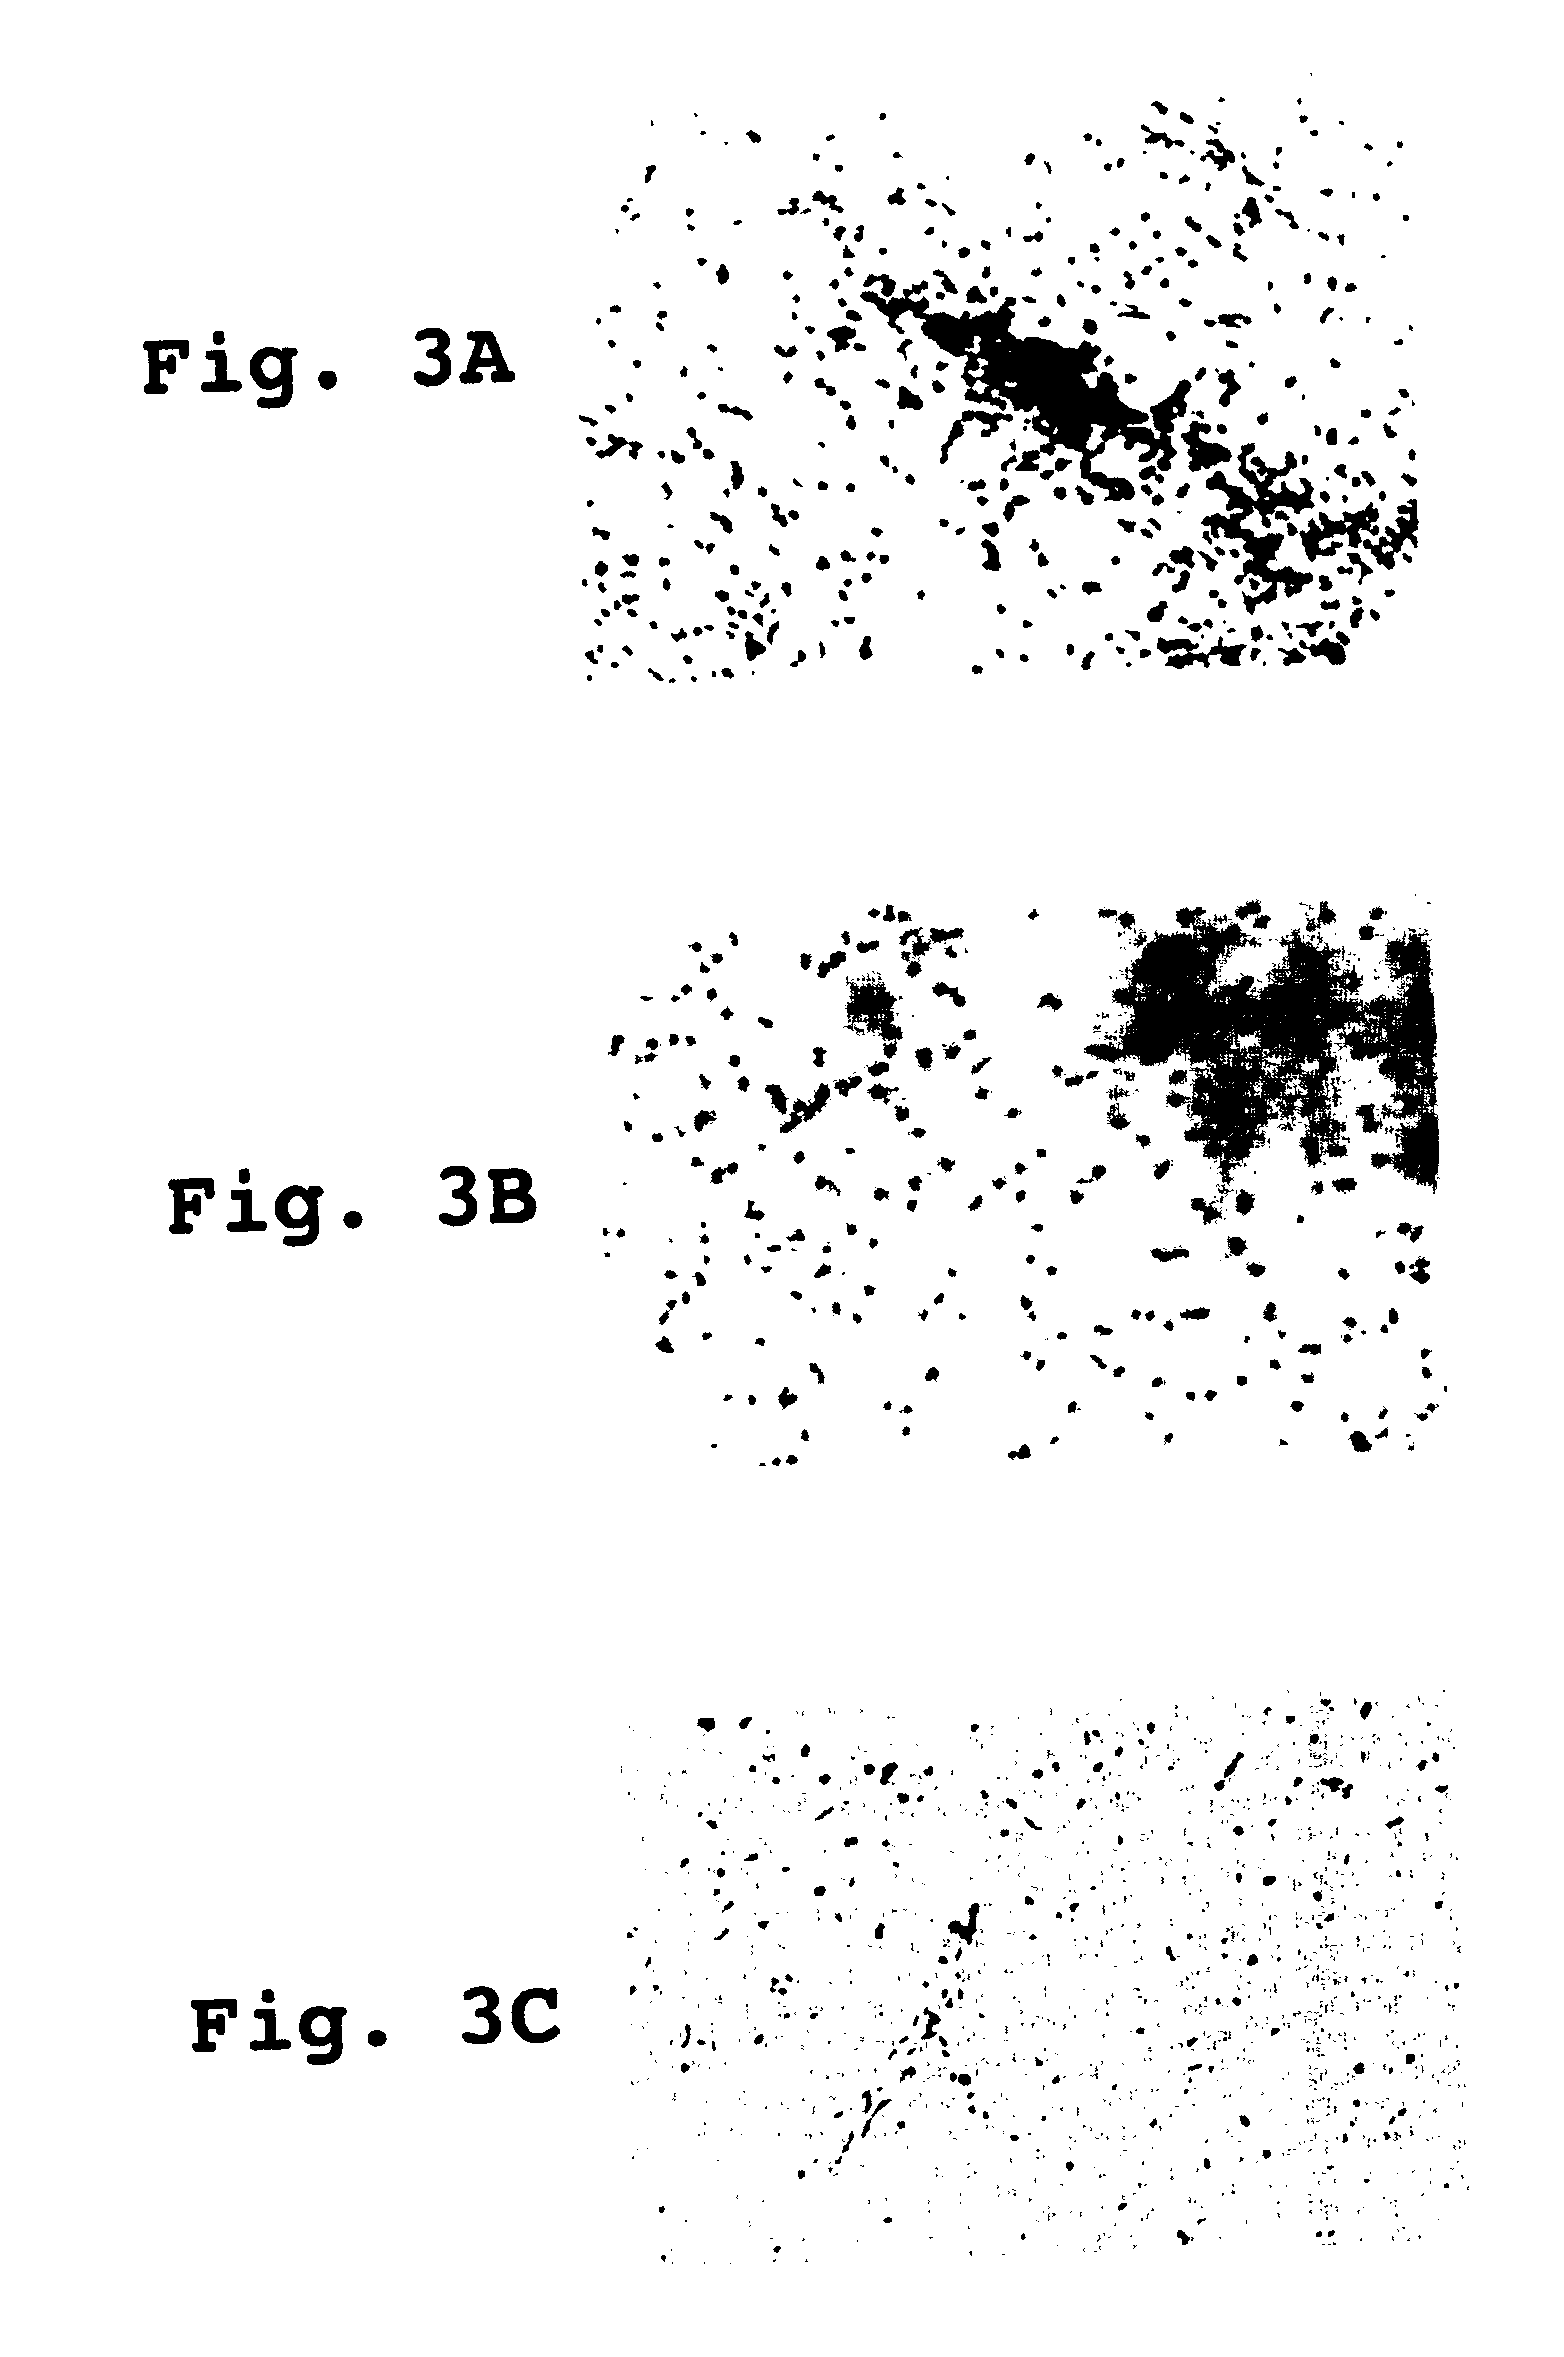 Orally-administered interferon-tau compositions and methods